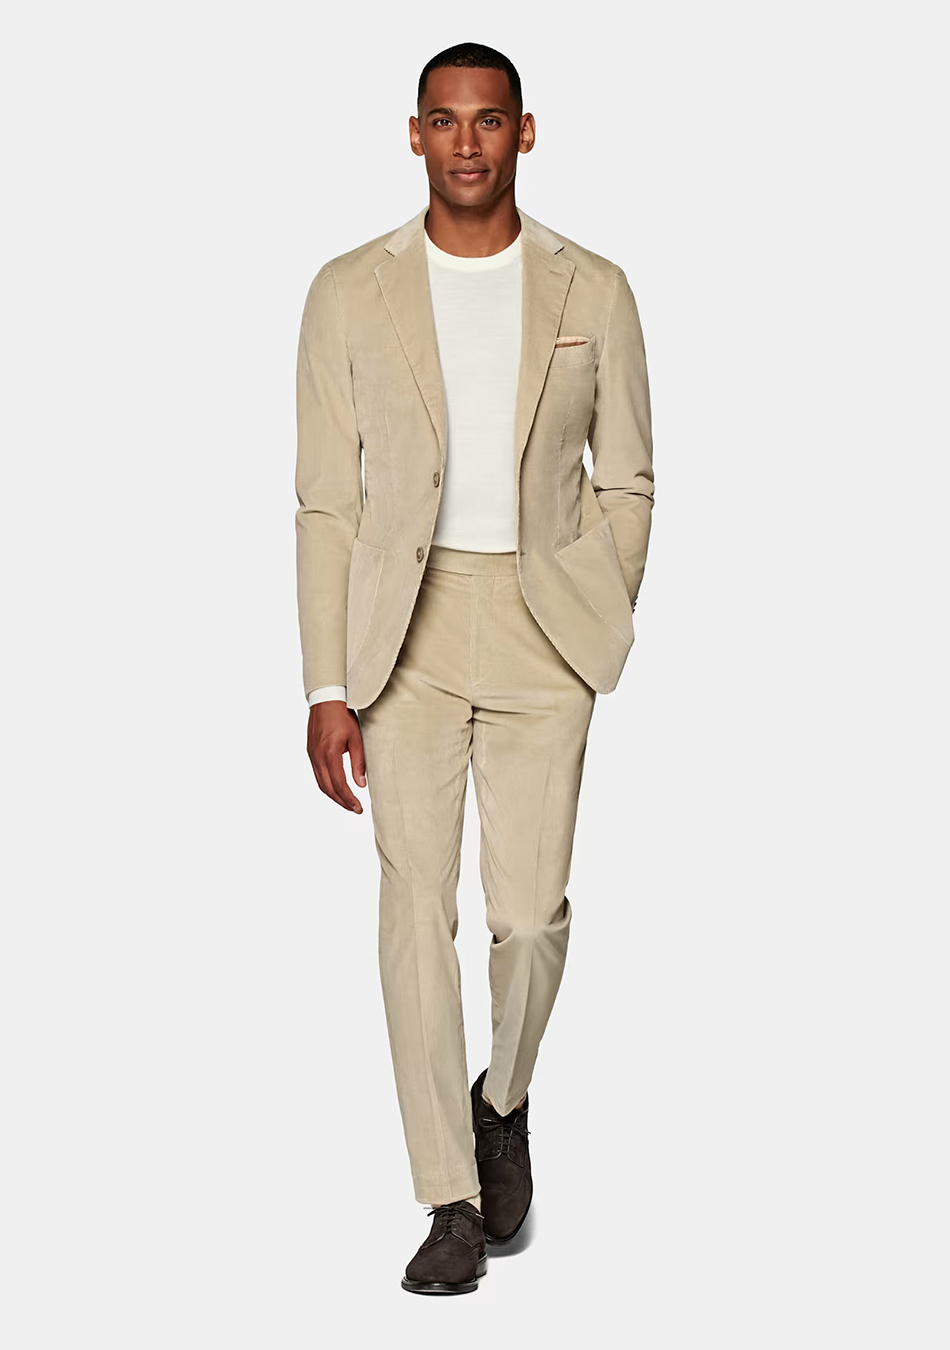 Tan suit. white tee, and brown suede derby shoes